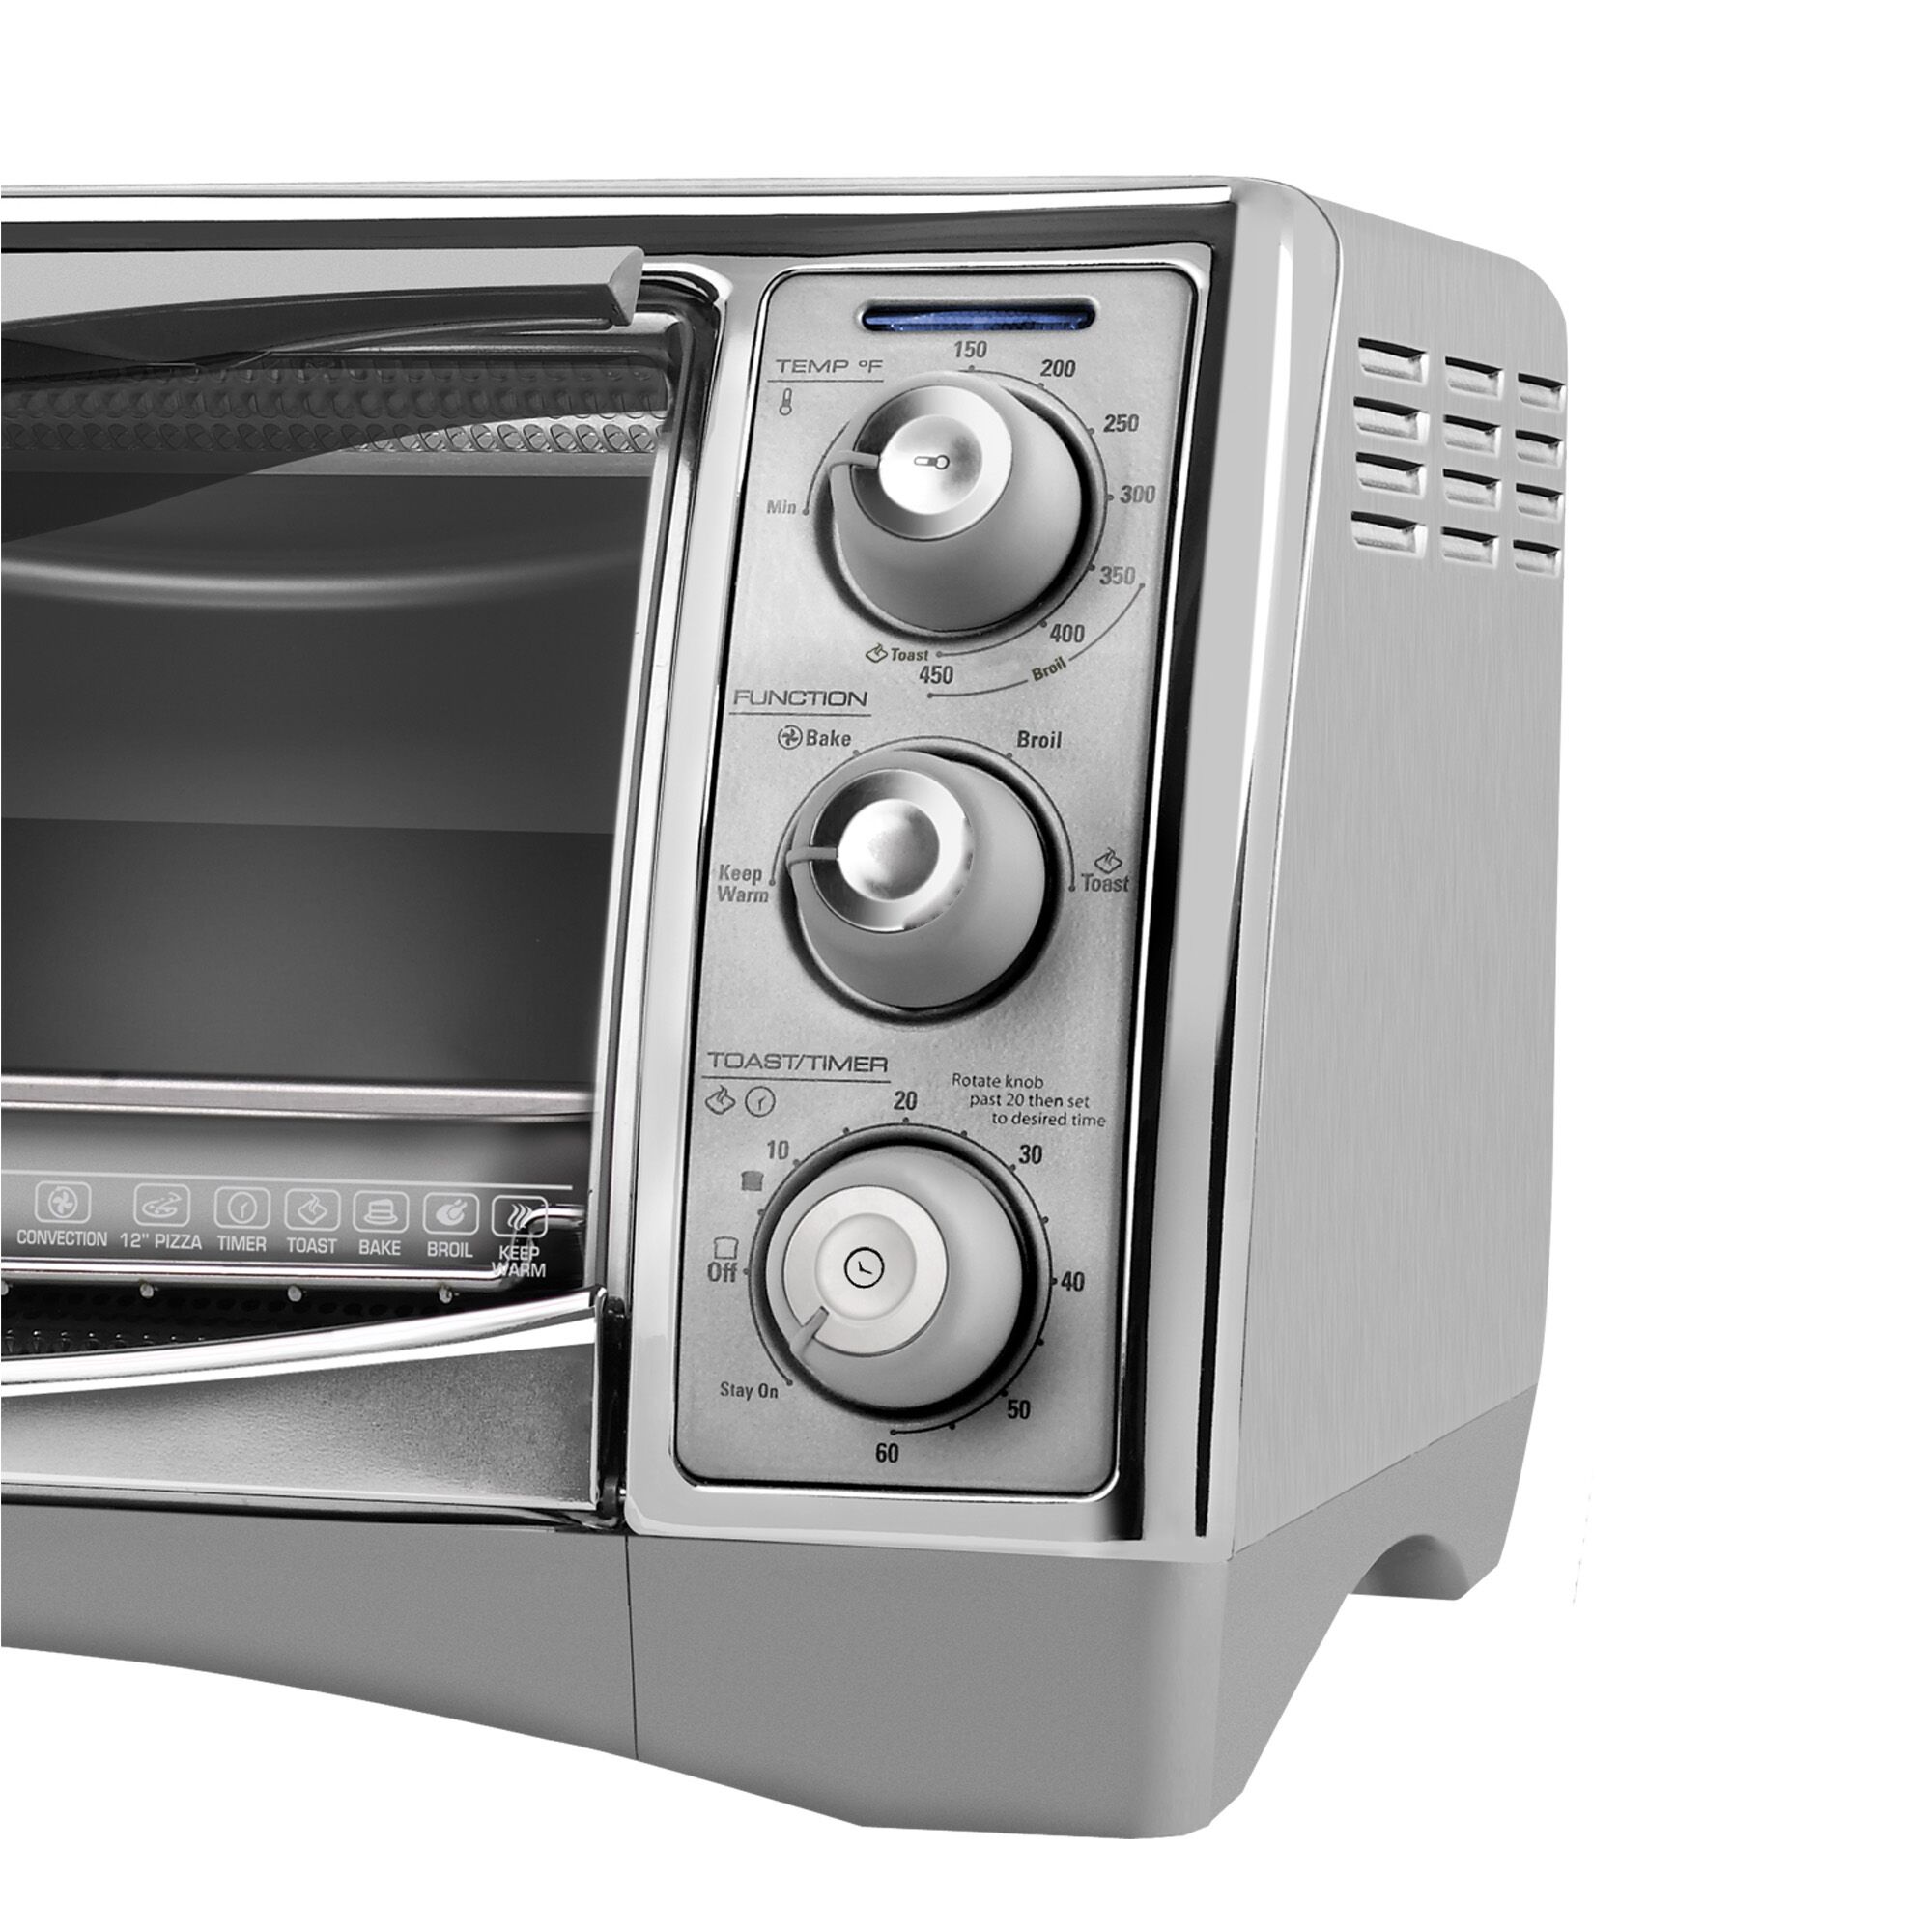 Close up of 6 slice countertop convection toaster oven.